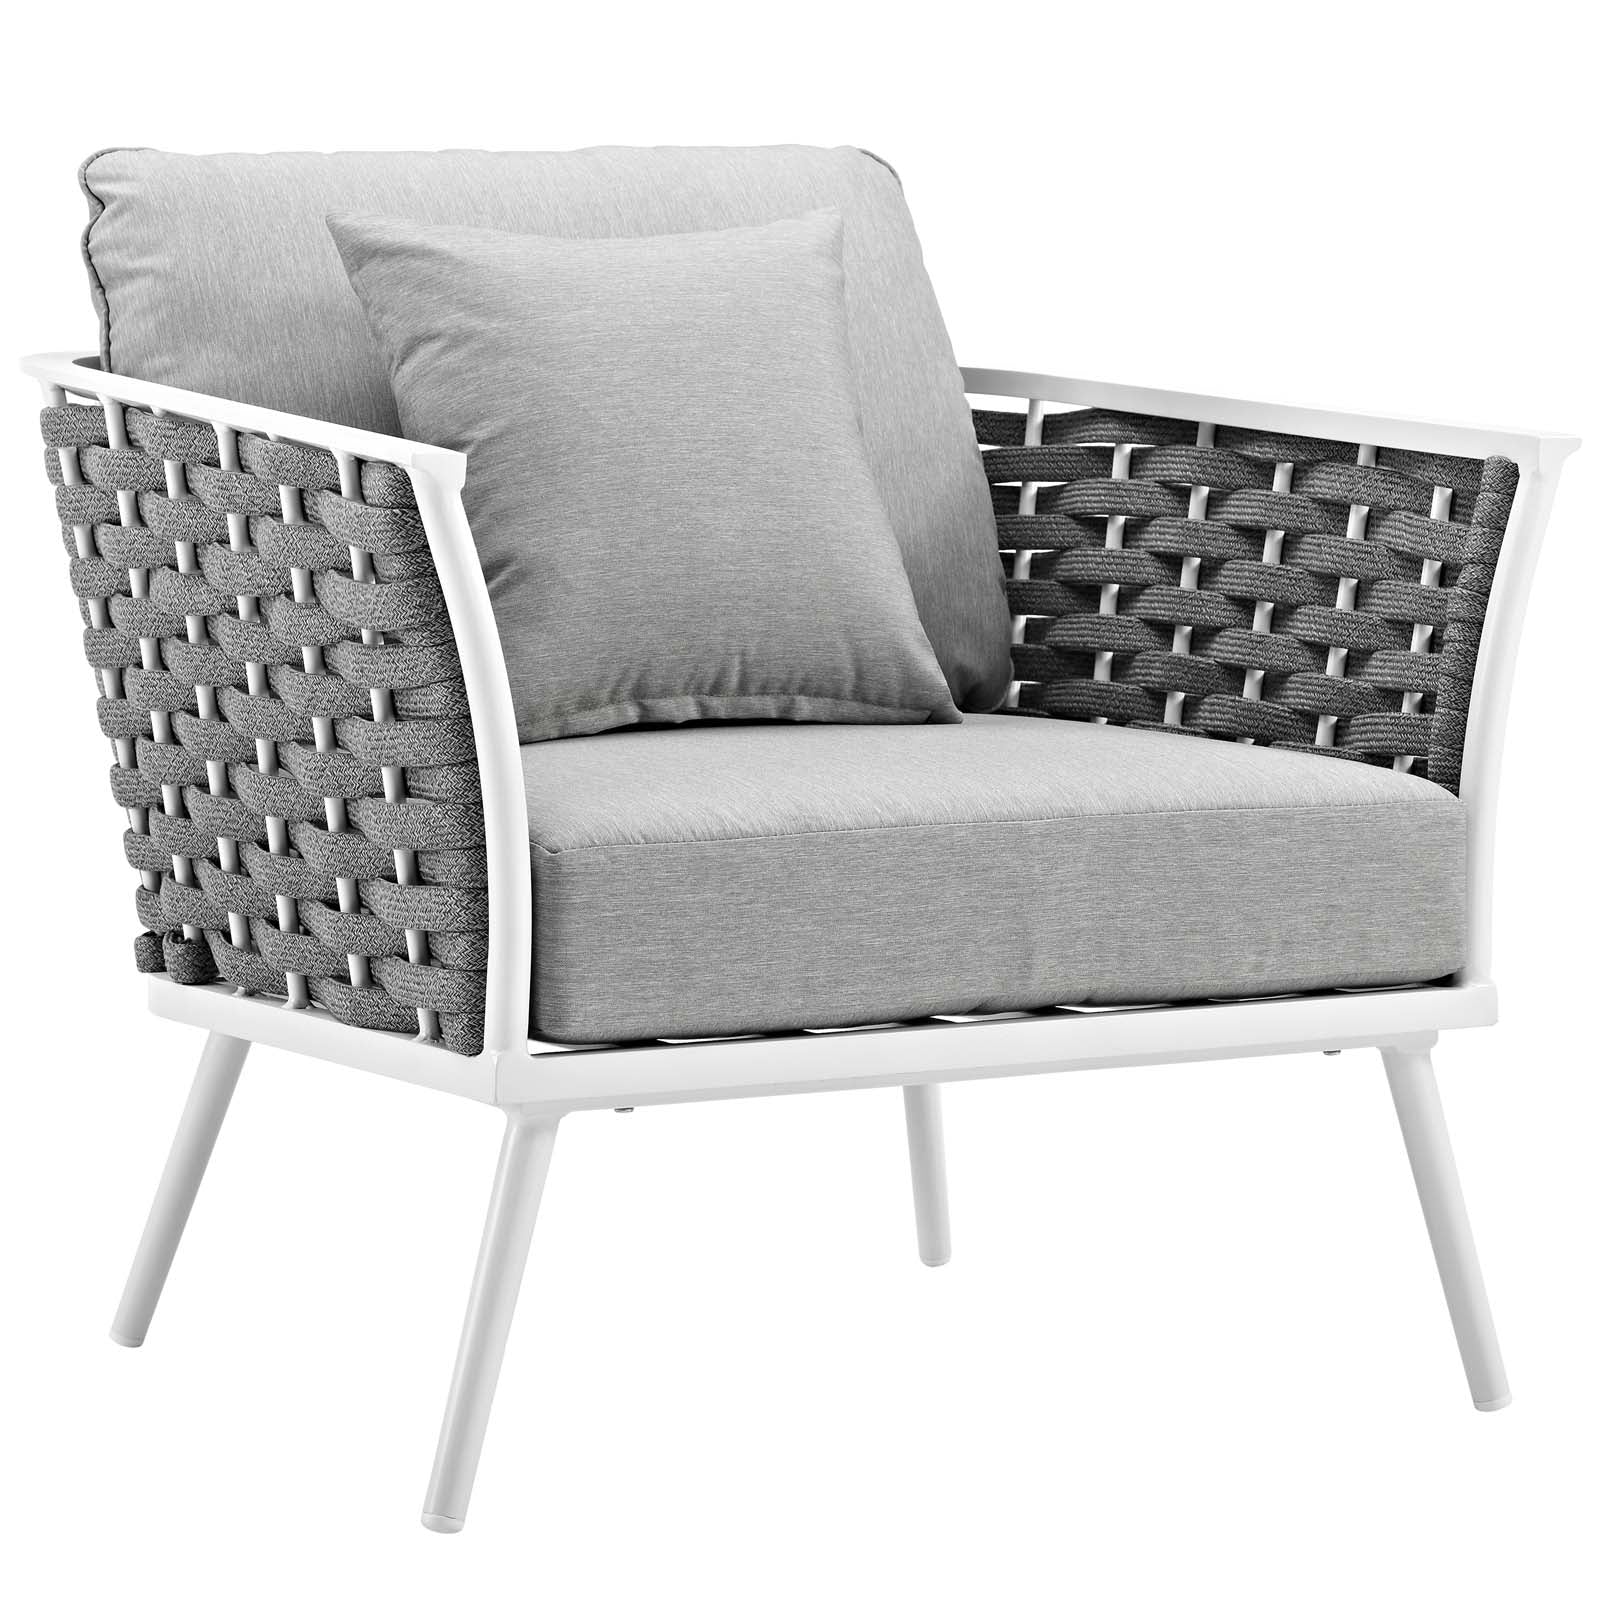 Modway Outdoor Chairs - Stance Outdoor Armchair White & Gray